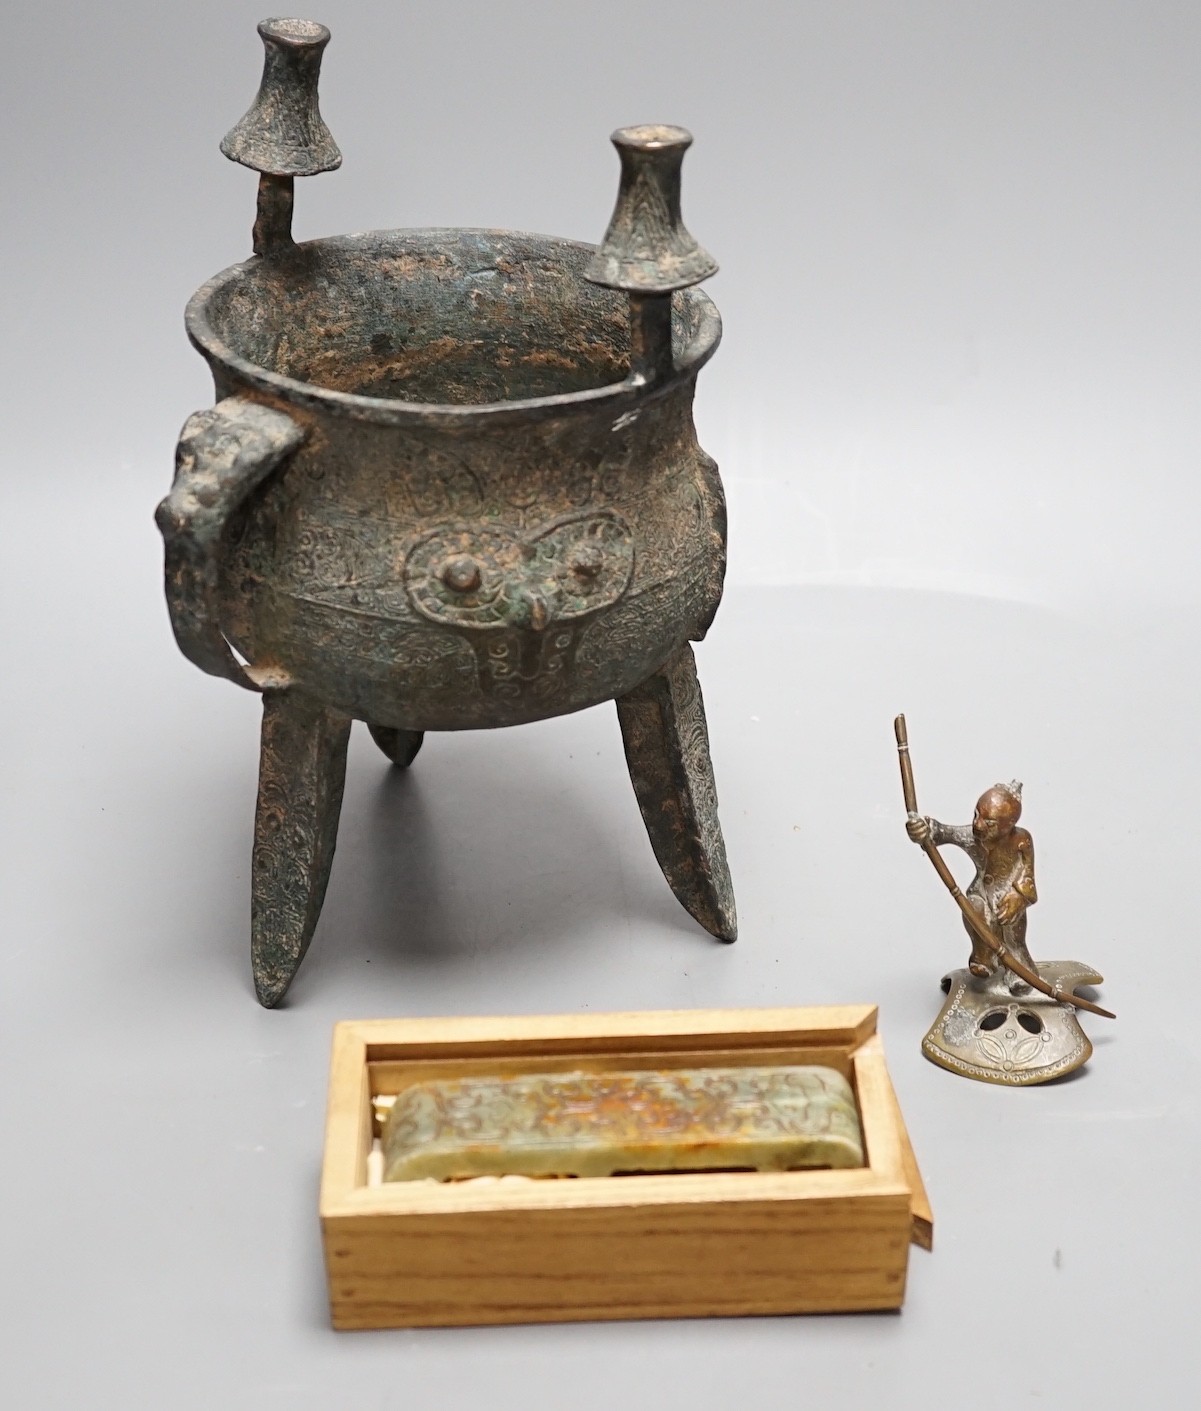 A Chinese green and russet jade belt buckle, an archaistic bronze tripod vessel and a figural bronze. Tallest 25cm